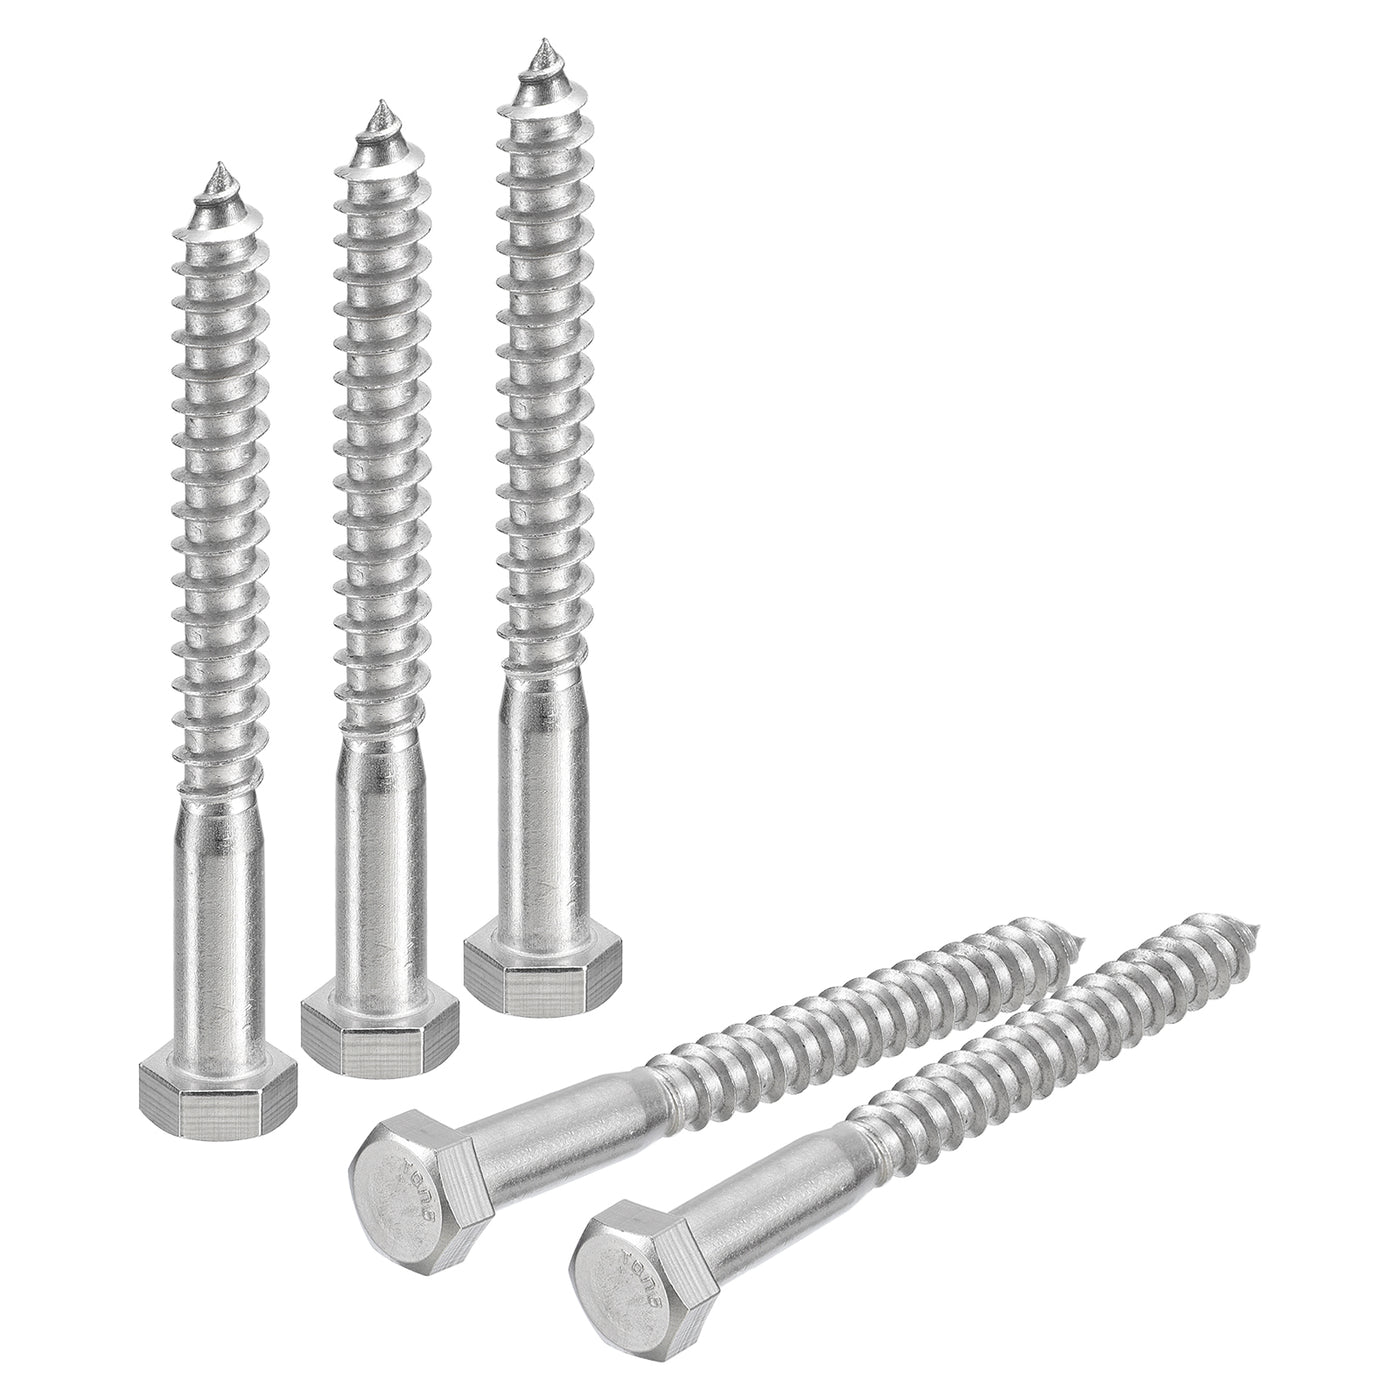 uxcell Uxcell Hex Head Lag Screws Bolts, 20pcs 3/8" x 4" 304 Stainless Steel Wood Screws